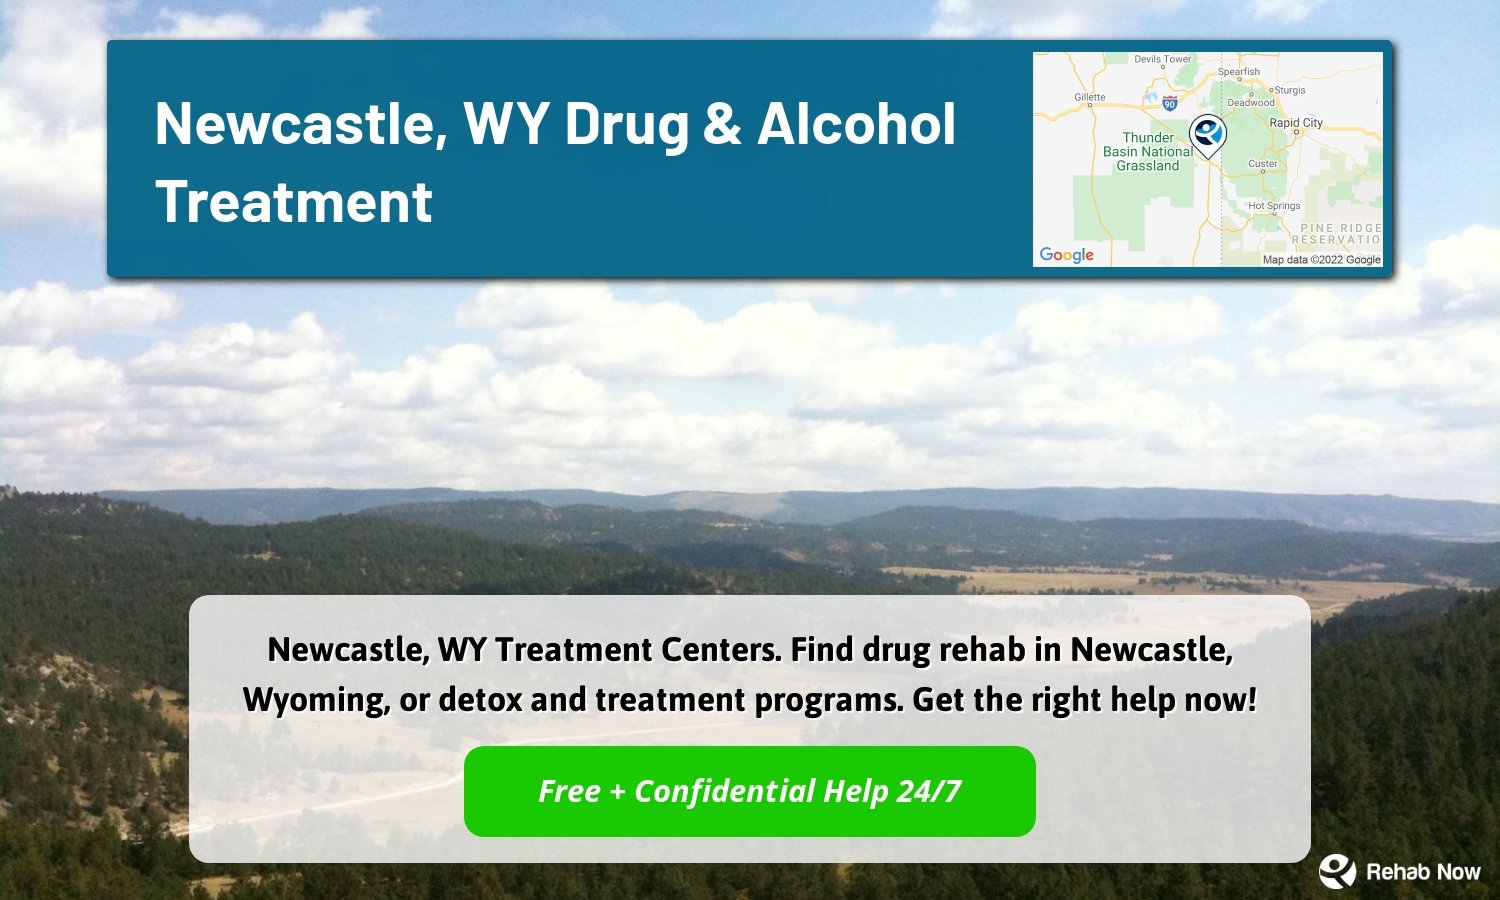 Newcastle, WY Treatment Centers. Find drug rehab in Newcastle, Wyoming, or detox and treatment programs. Get the right help now!